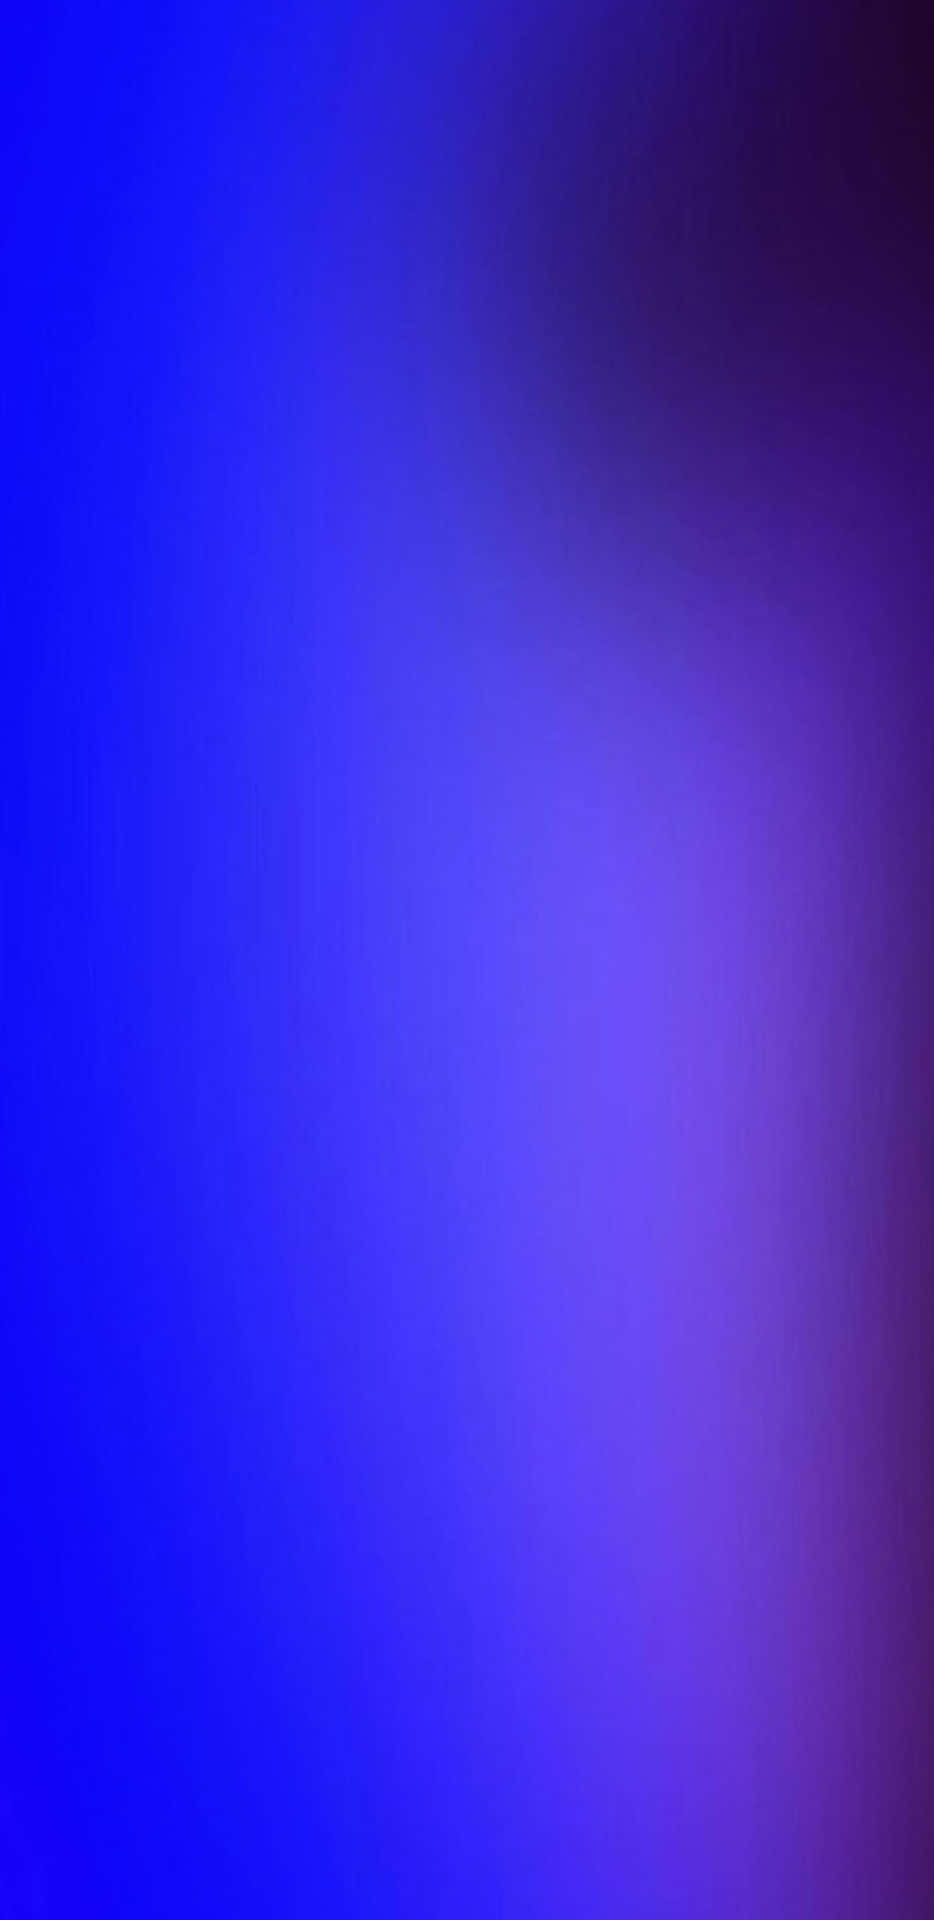 Bright Simple Blue iPhone Wallpaper